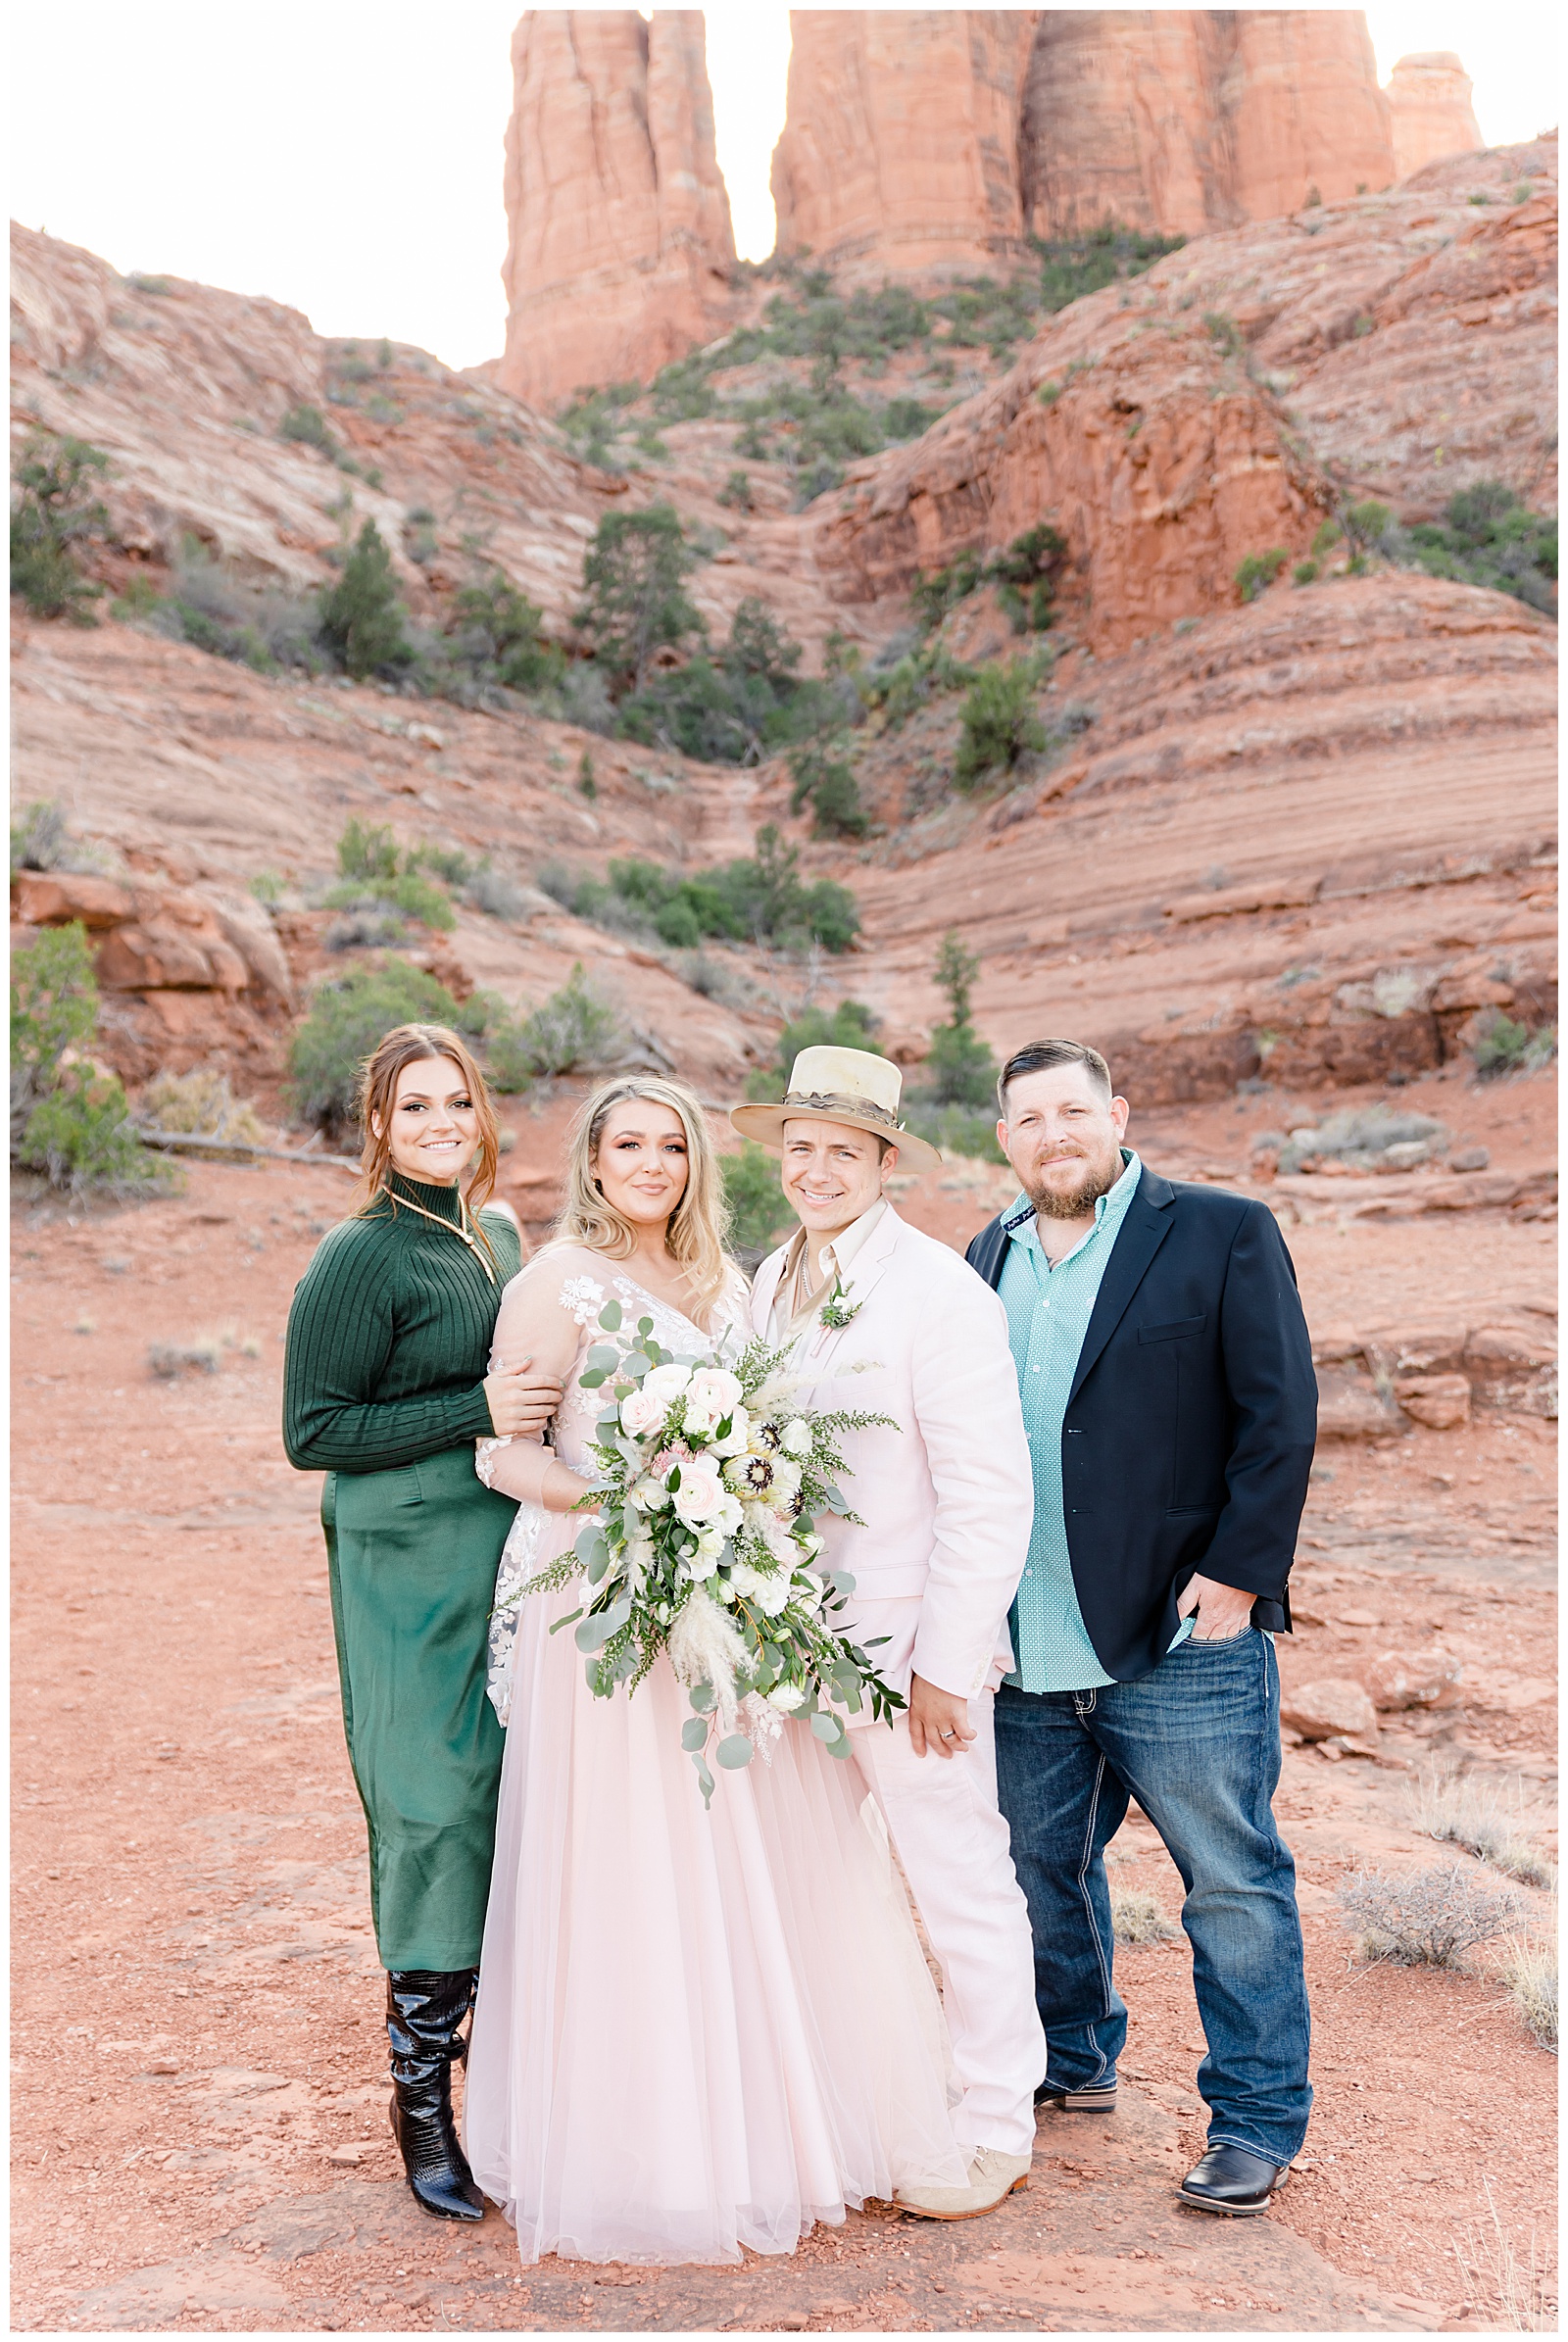 An elopement couple and their two witnesses in front of Cathedral rock